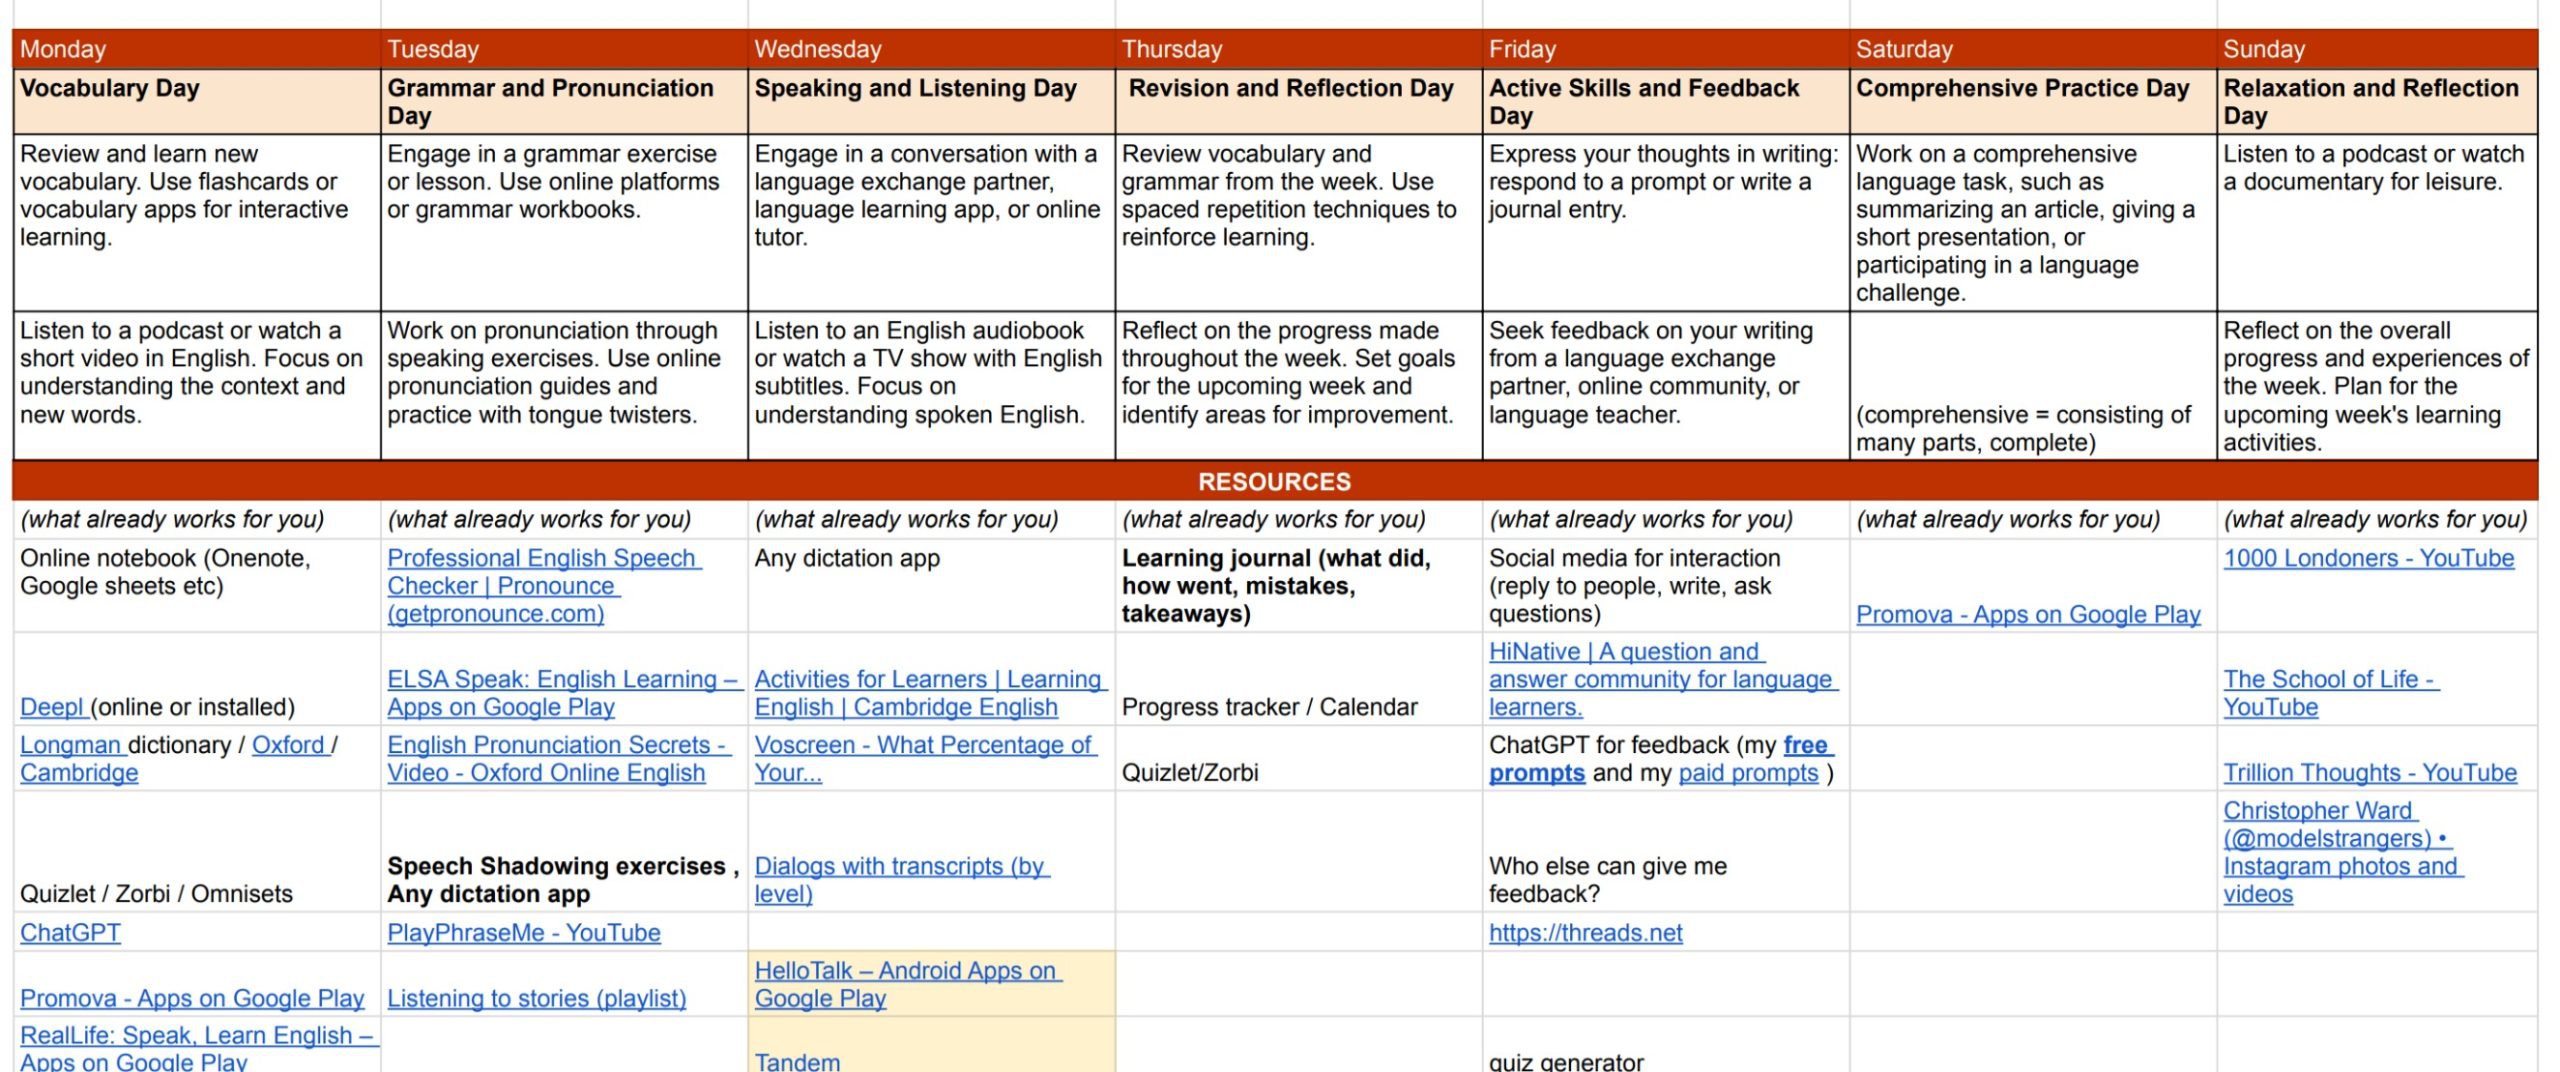 learning plan template with resources